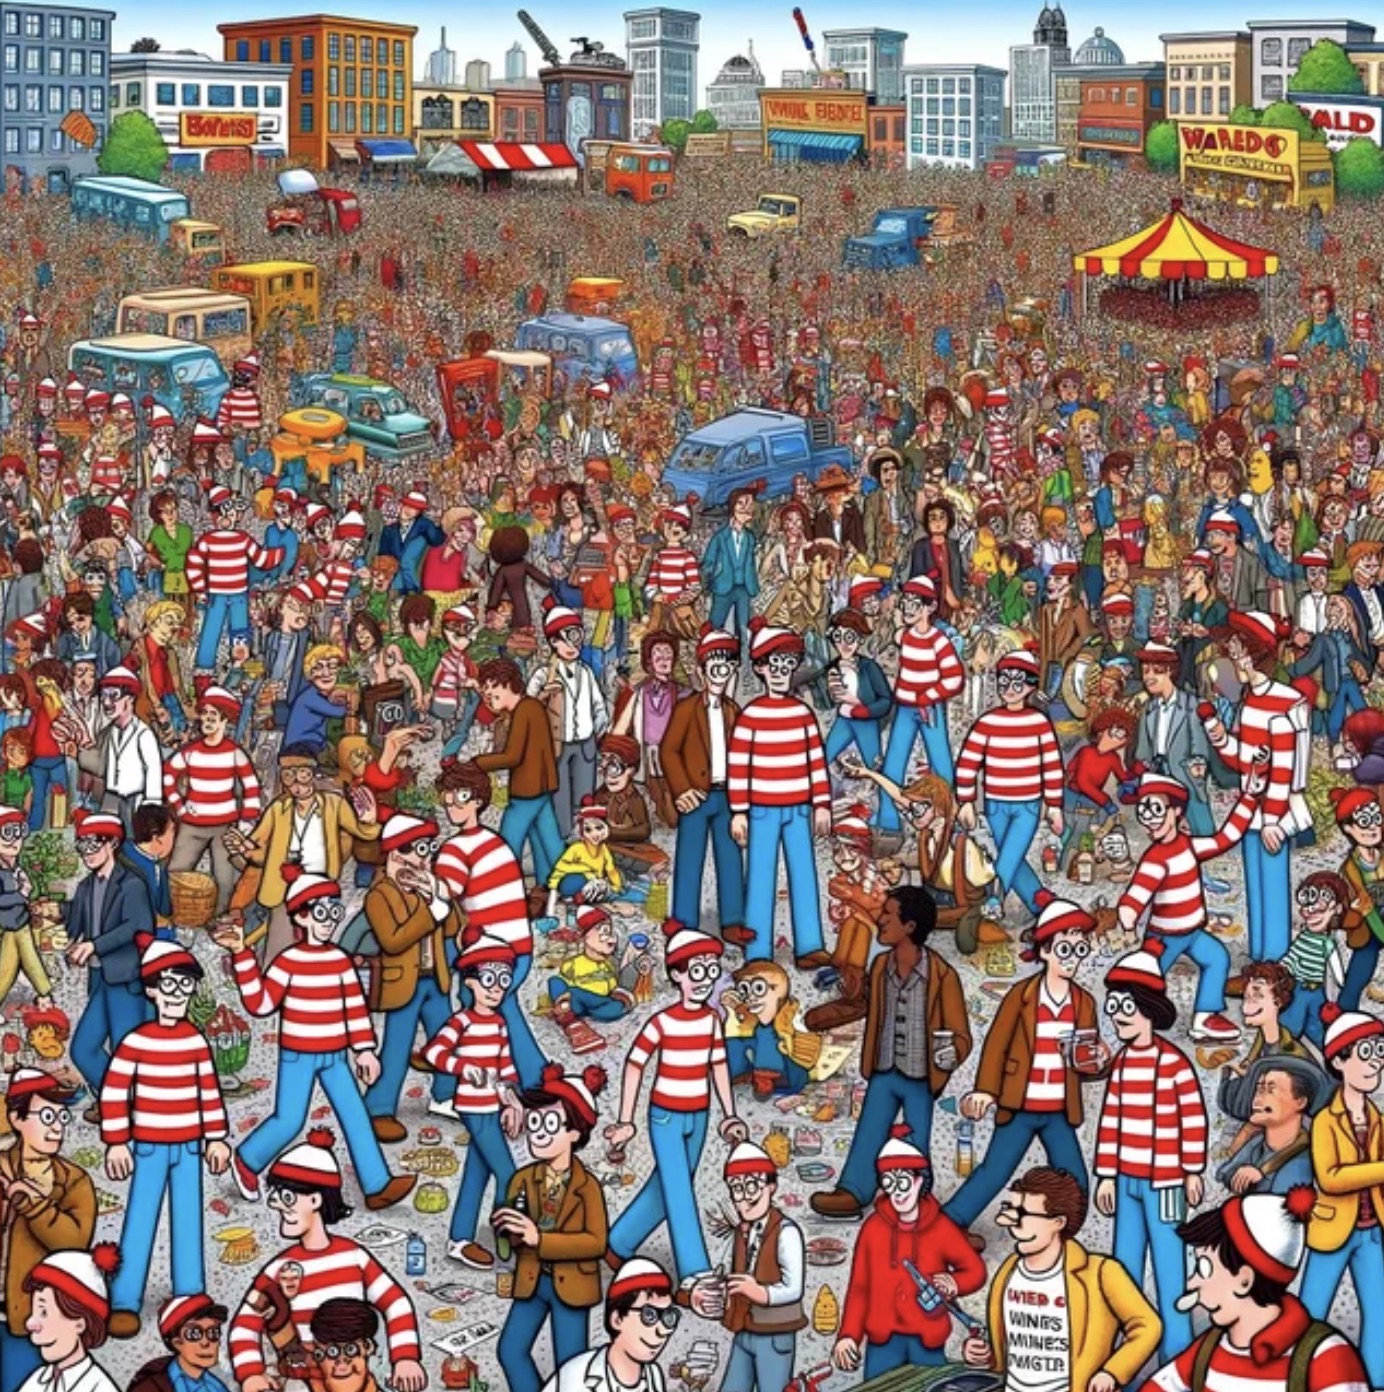 Quiet_Ambassador_927 isn’t alone in testing ChatGPT’s ability to make a Where’s Waldo picture either. User DaryJohn tried to make it “increasingly difficult to find Waldo.” Spoiler alert: It is never difficult to find Waldo.